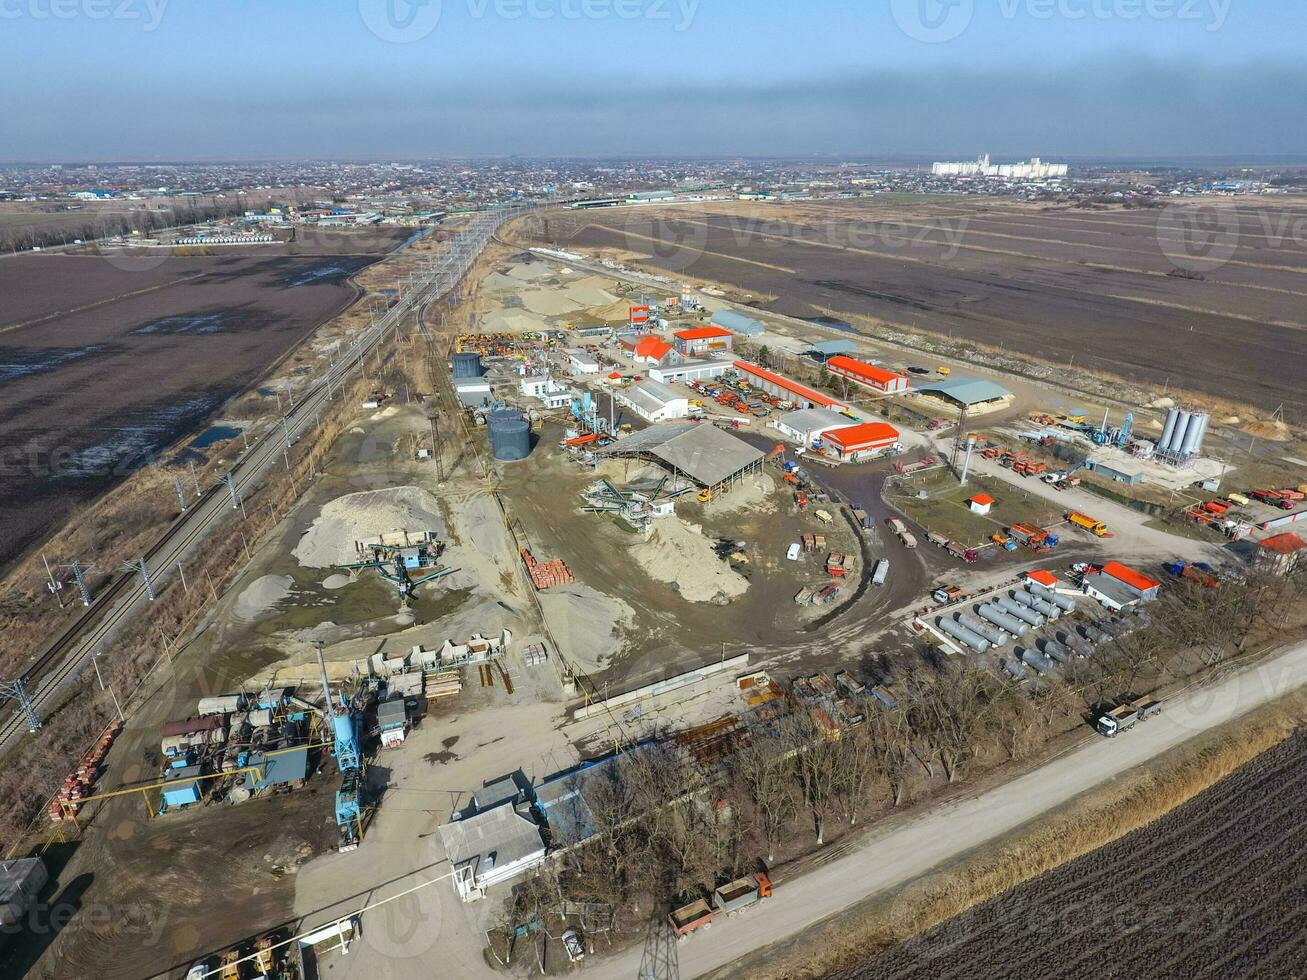 for road repair plant. The site with building materials for the photo